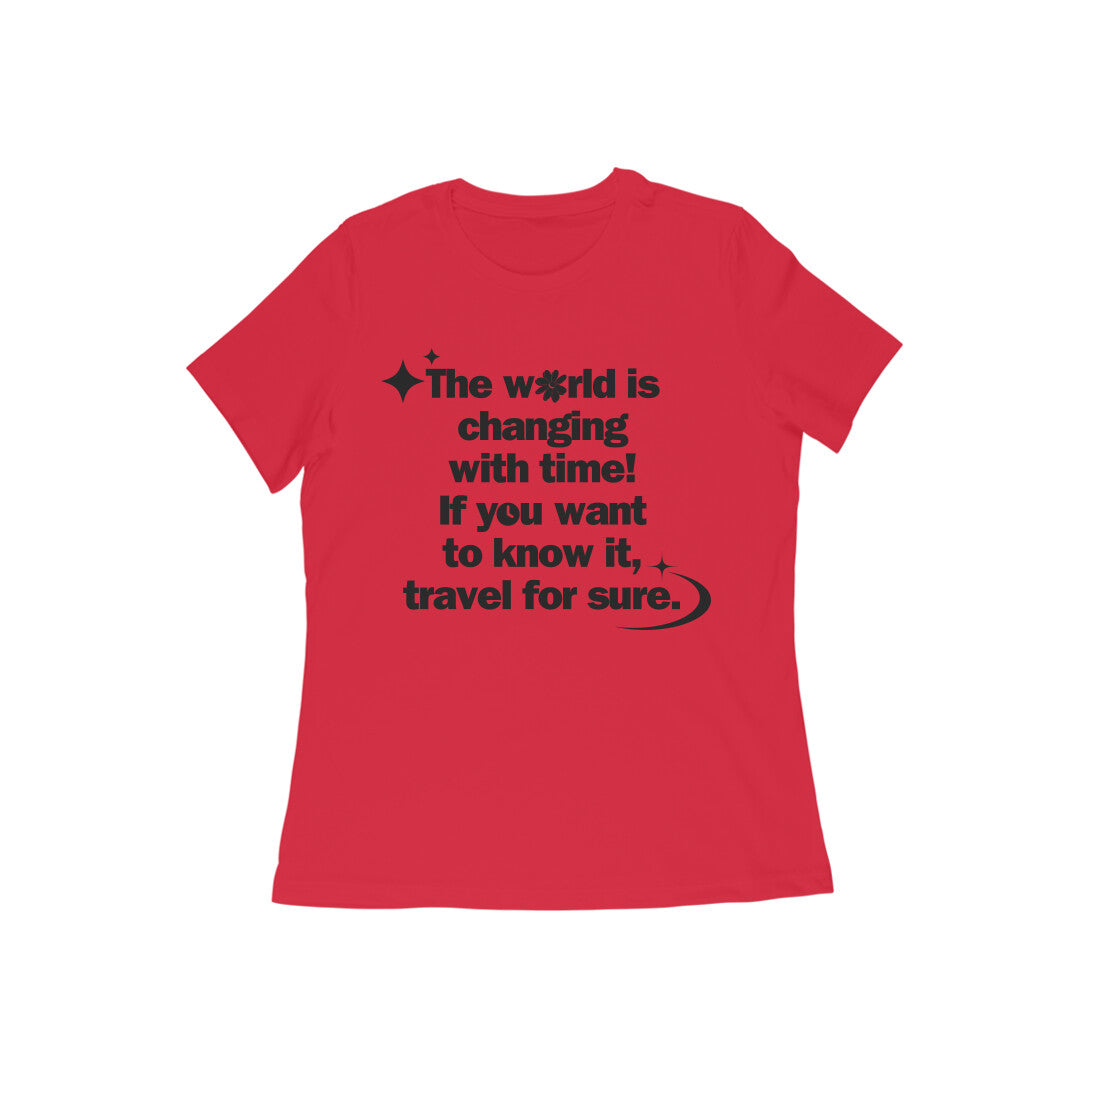 The world is changing with time... Black Text Women's T-shirt